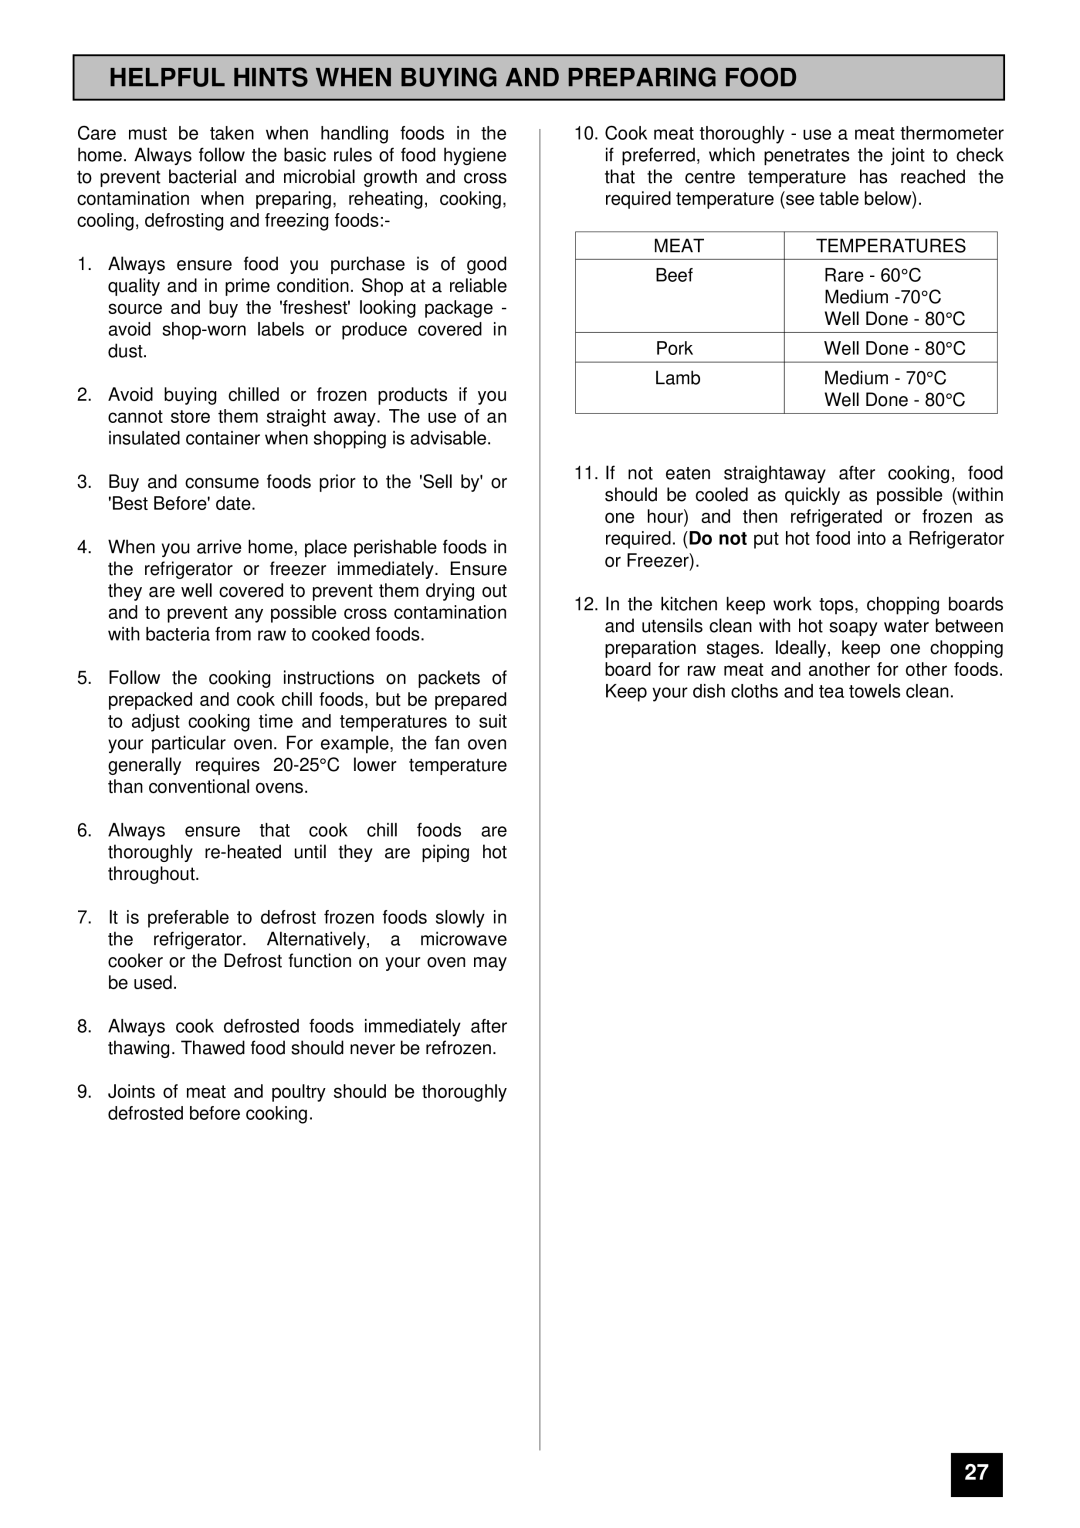 Moffat MD 900 B/W installation instructions Helpful Hints When Buying and Preparing Food, Meat Temperatures 